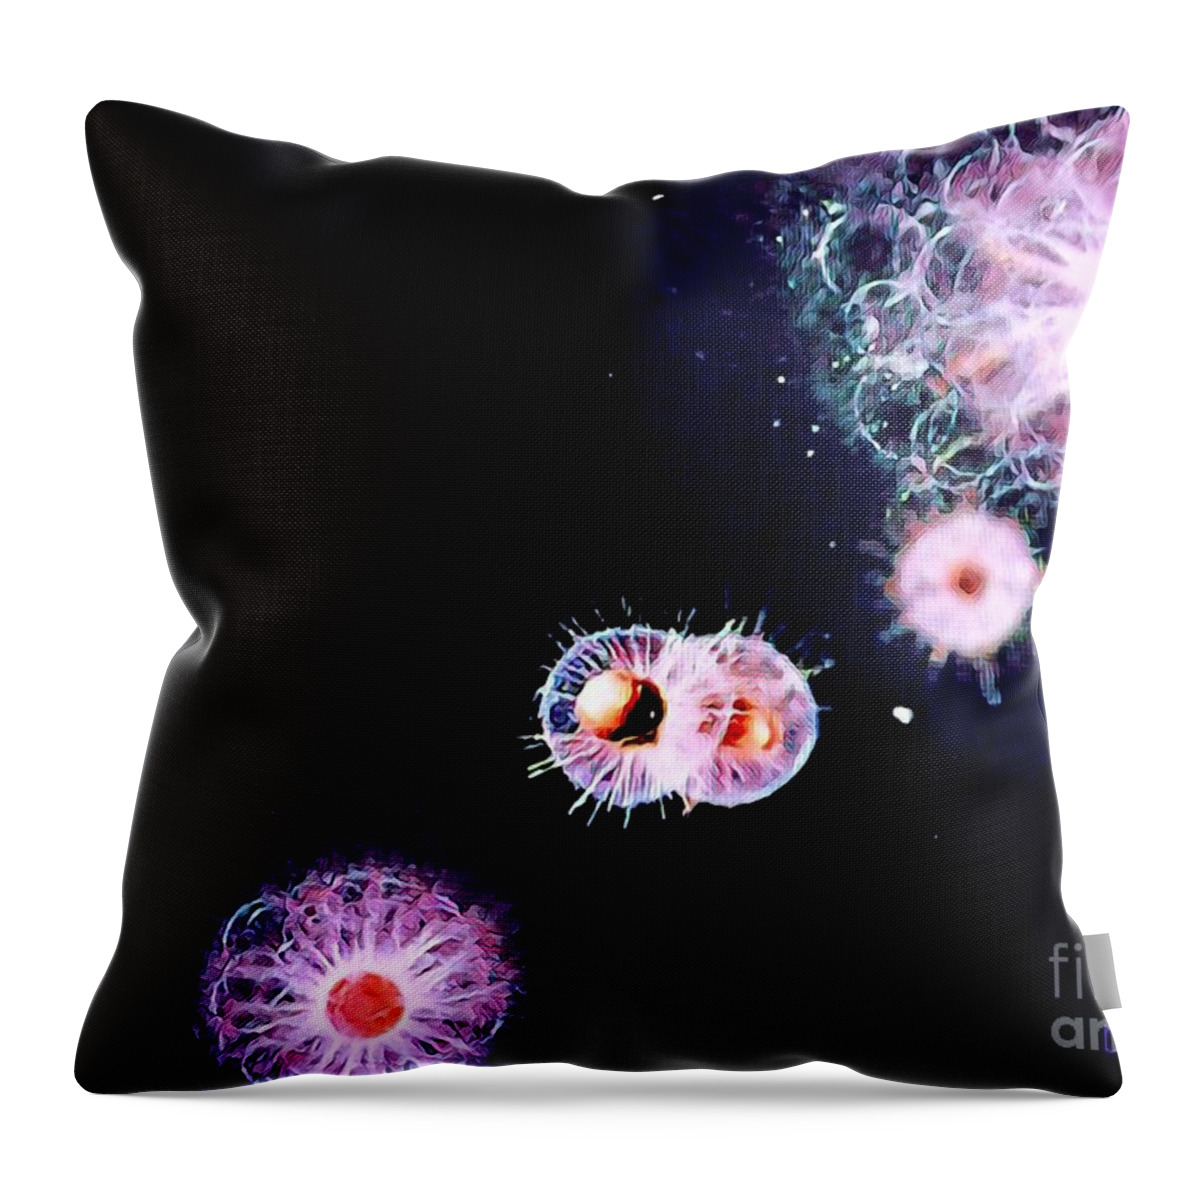 Evolution Throw Pillow featuring the digital art Primordial by Denise Railey